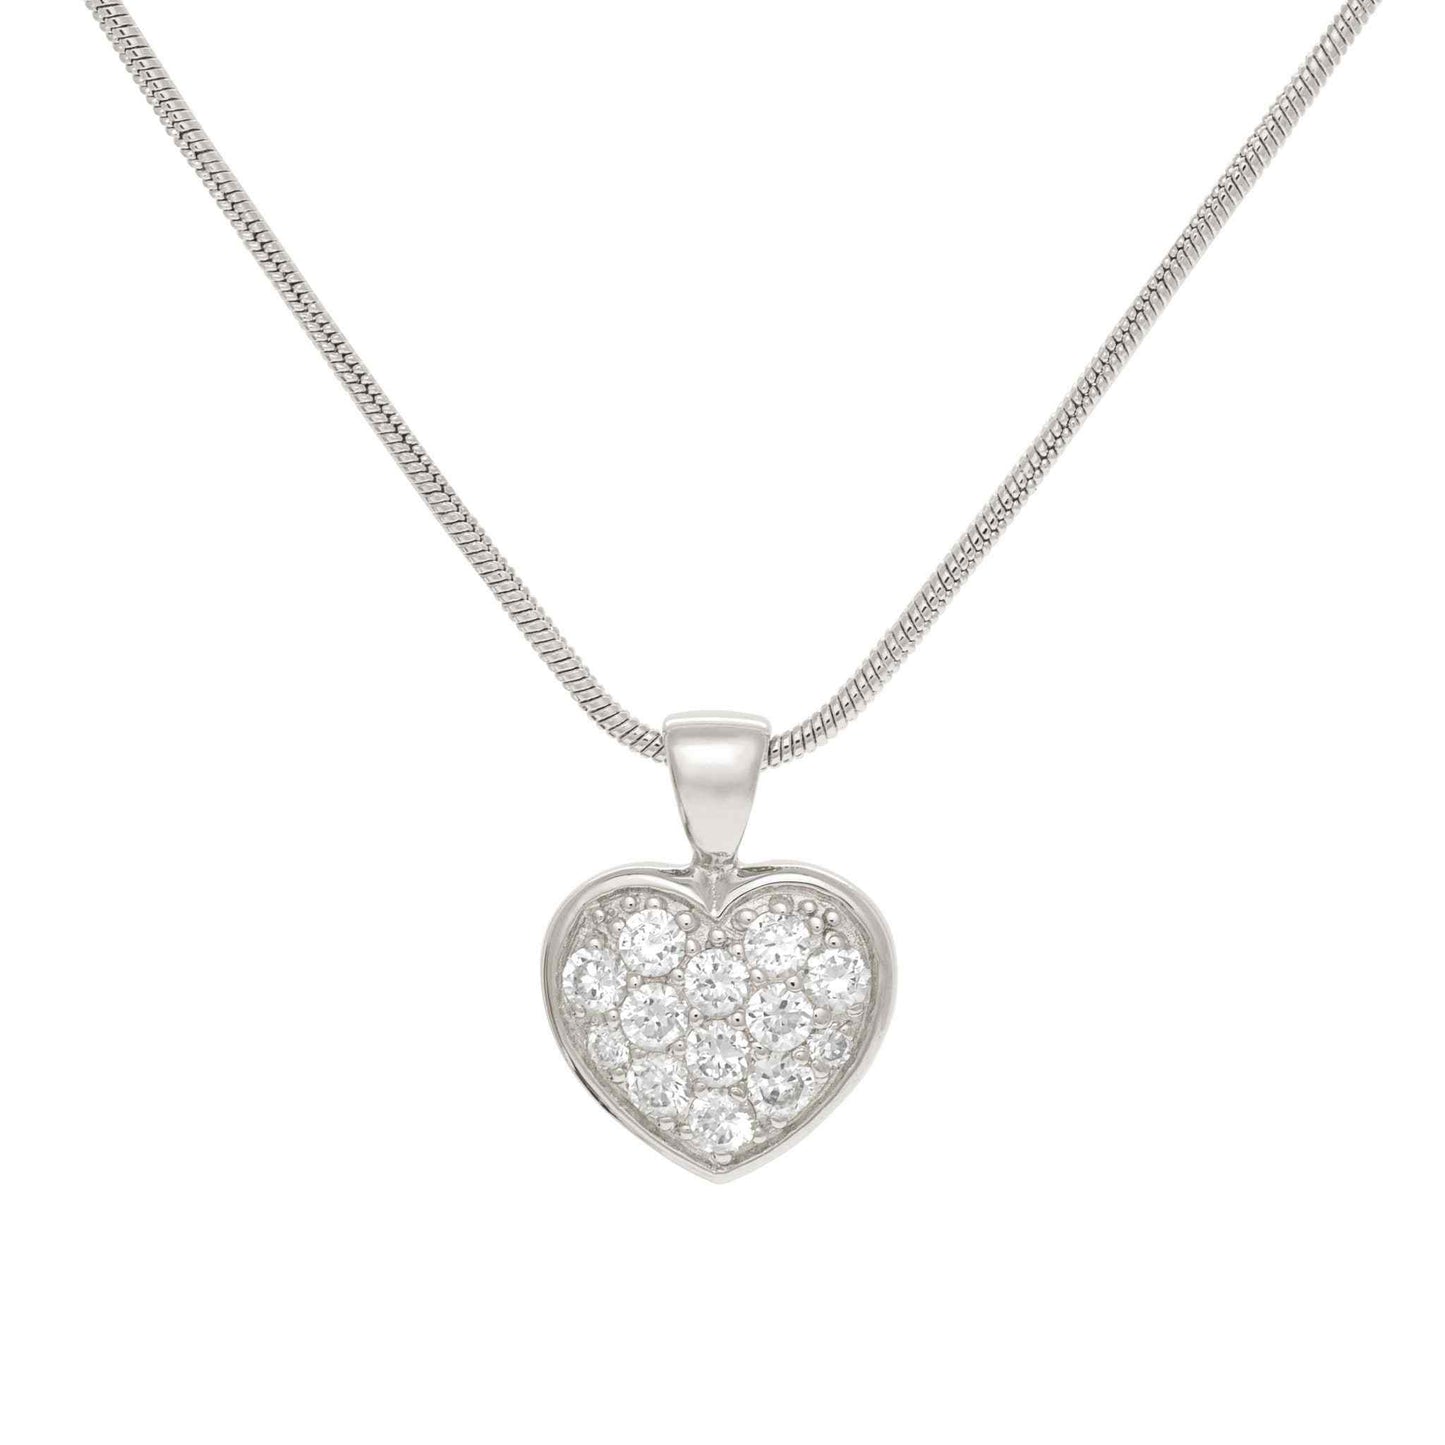 A simulated diamond pave heart necklace displayed on a neutral white background.